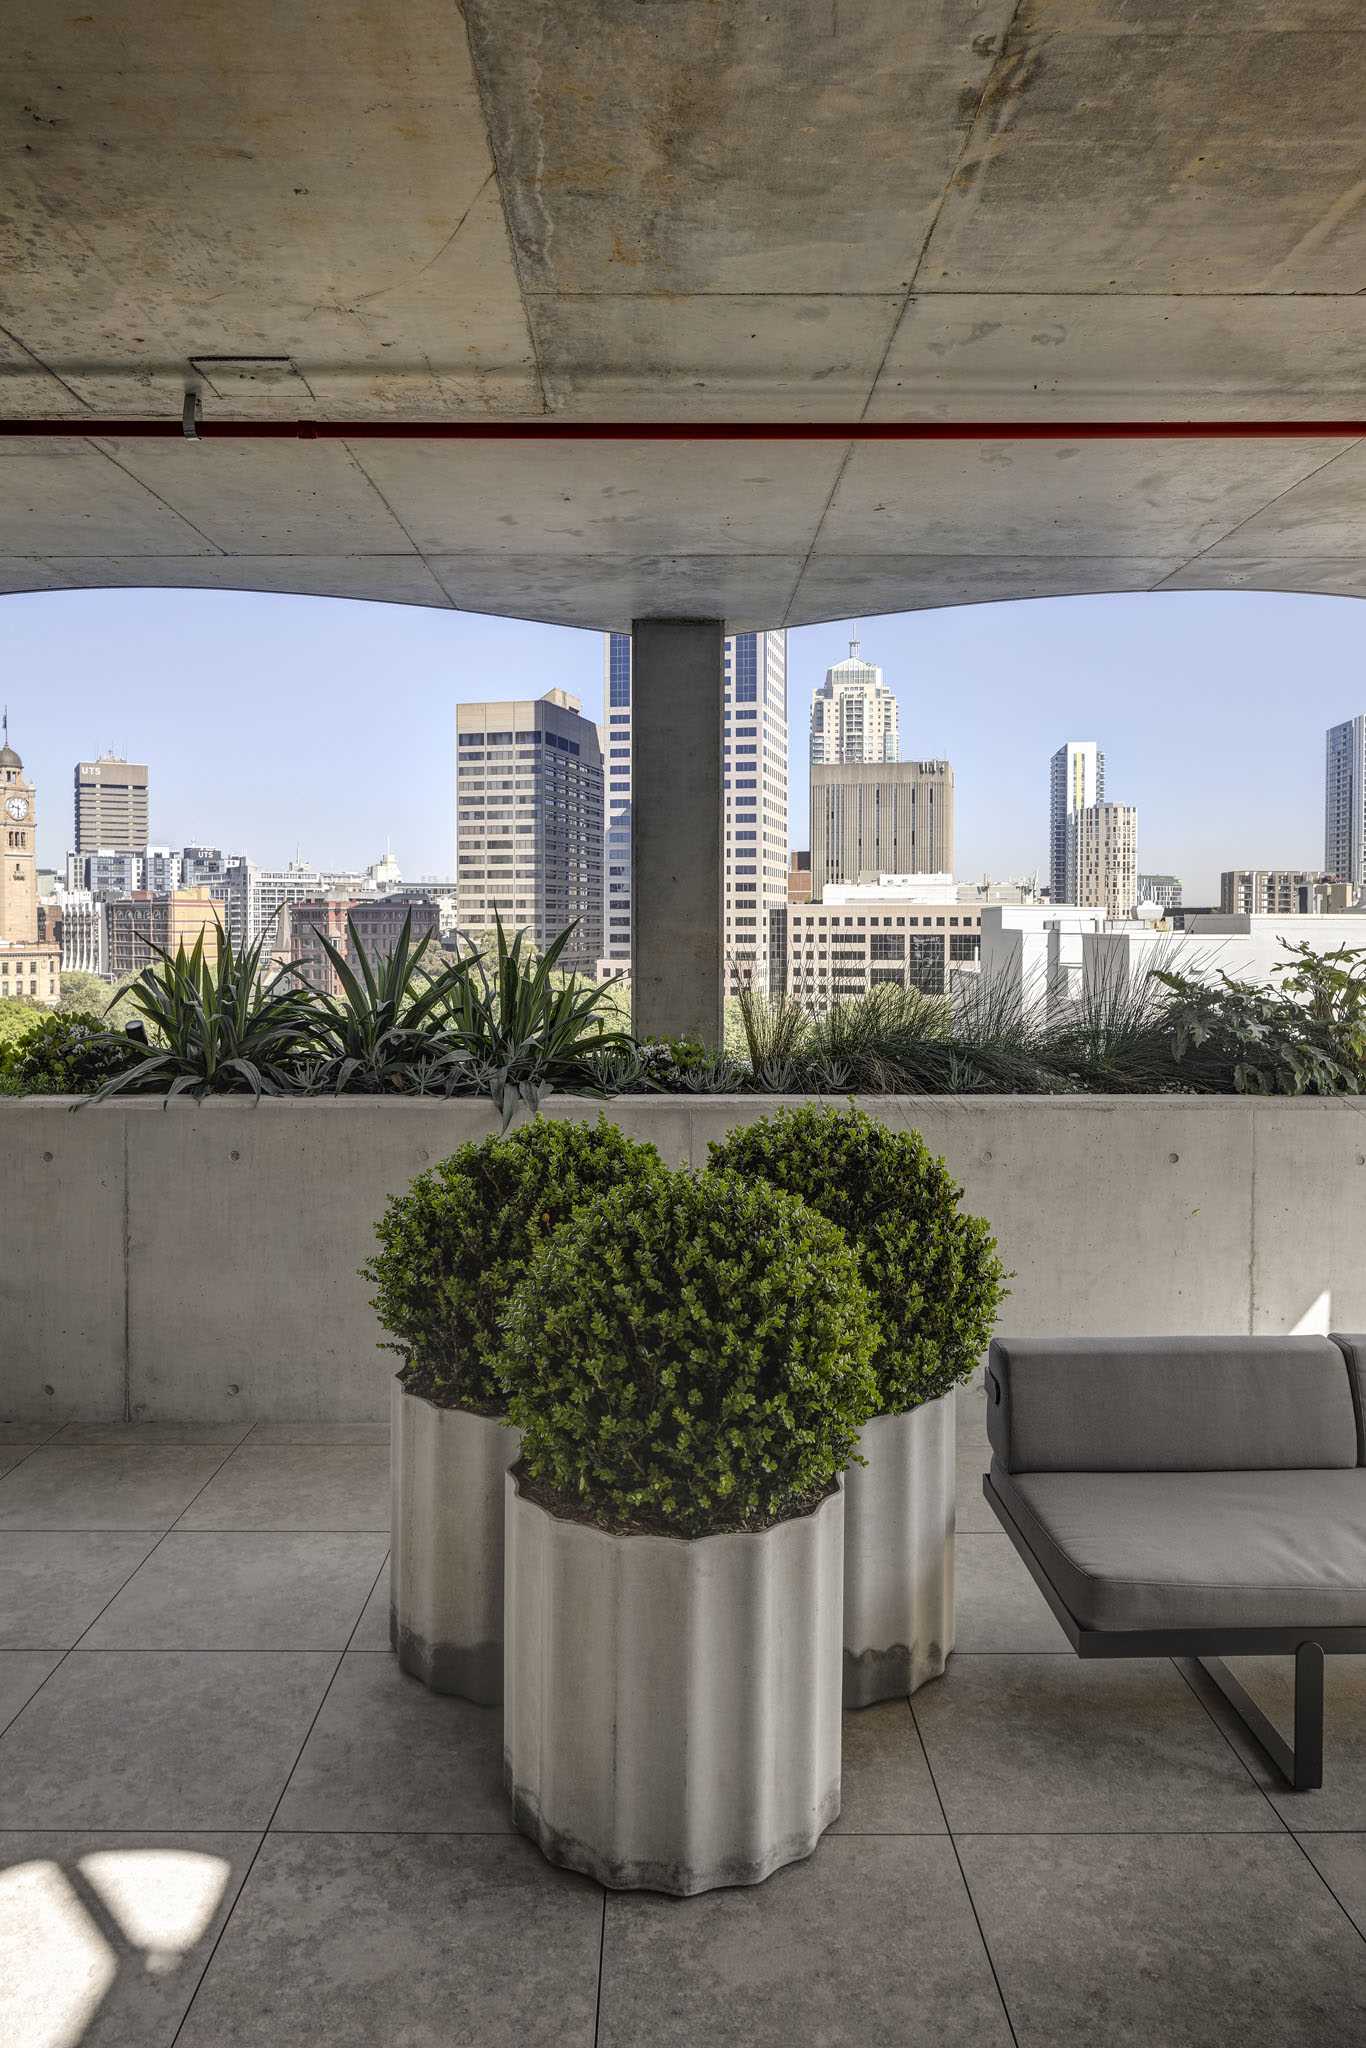 A rooftop patio with concrete planters.